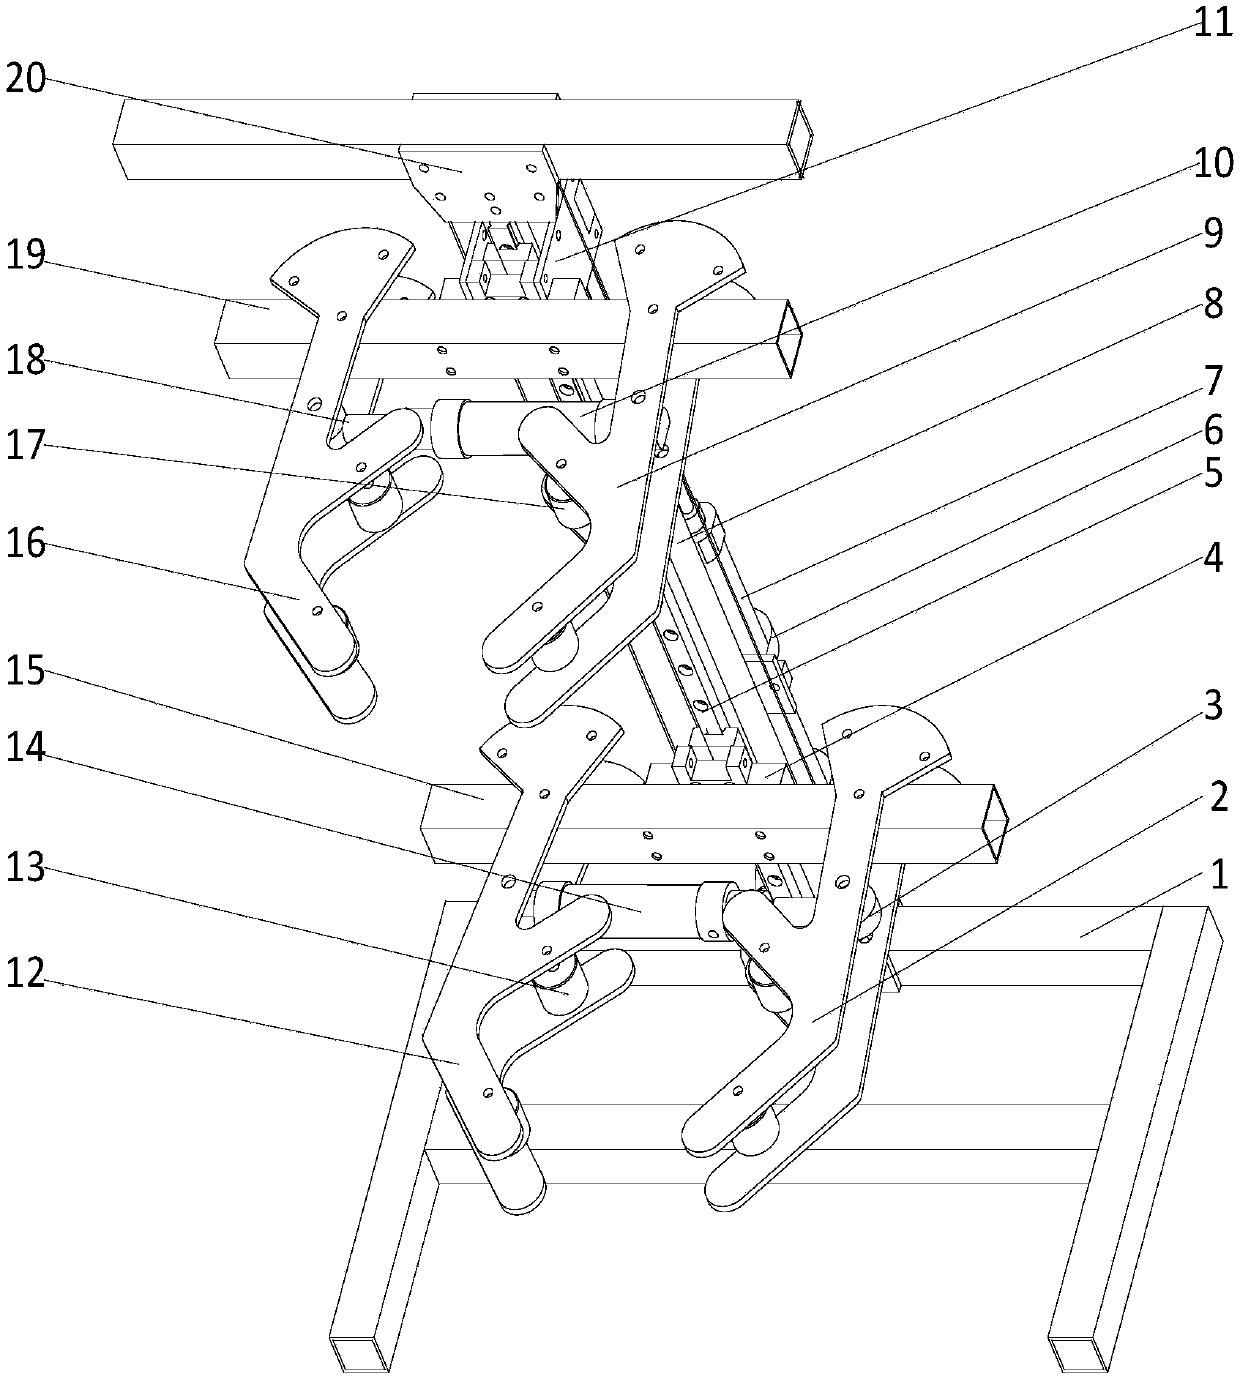 A pneumatic pole-climbing robot based on the principle of bionic peristalsis